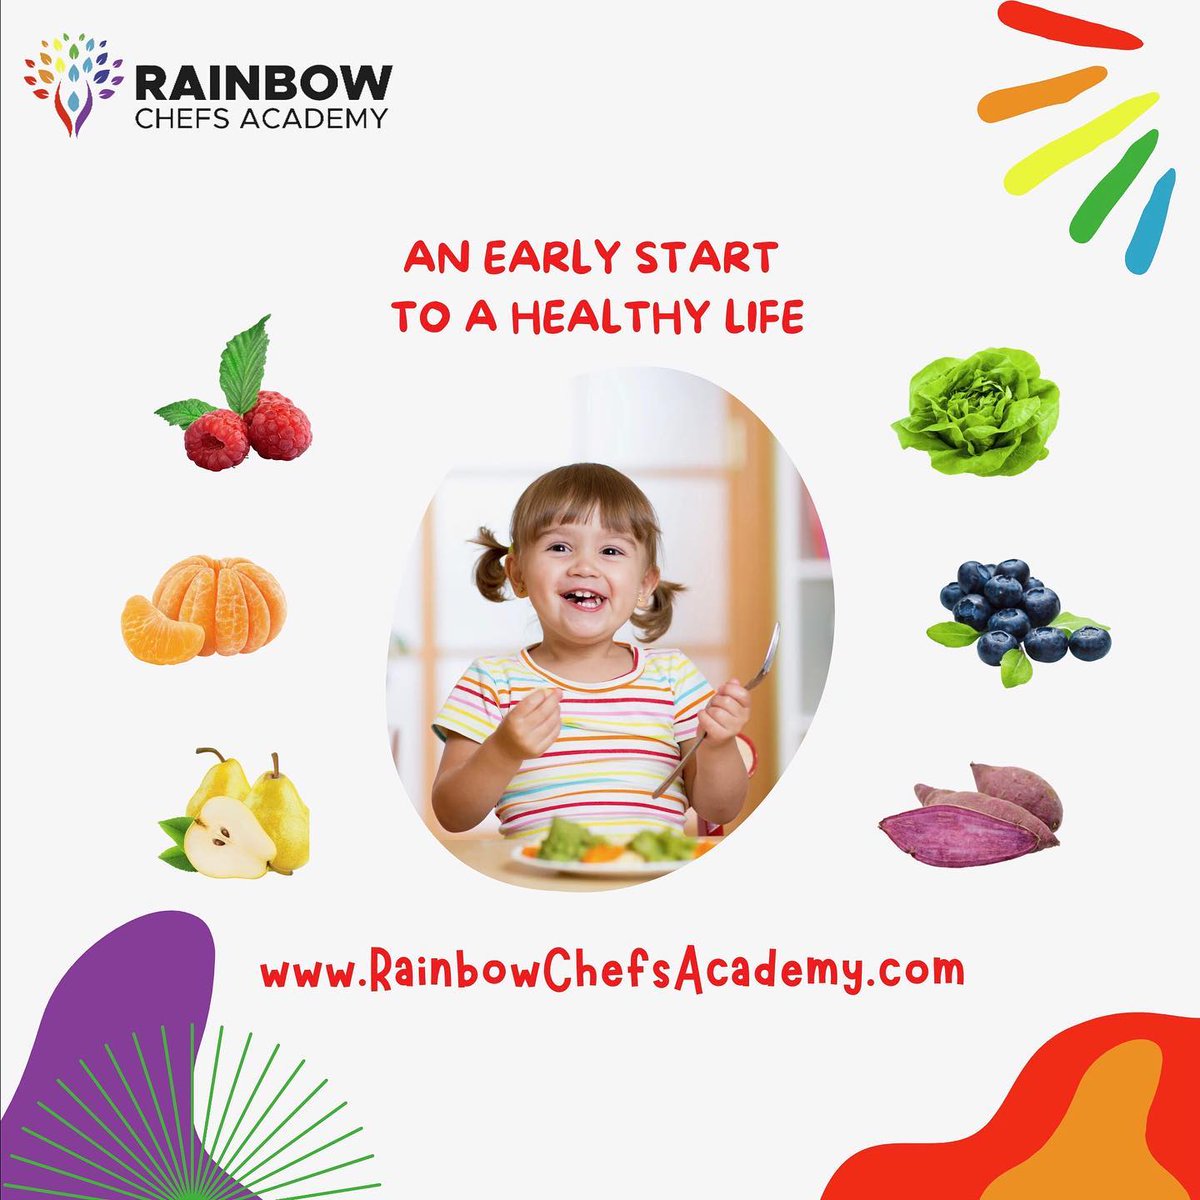 At Rainbow Chefs Academy, we introduce little chefs to knowledge that lasts a lifetime.

✅Creates a strong foundation
✅Nurtures minds 
✅Builds healthy habits
✅Empowers families  

🌈 ❤️

#HealthyKids #NutritionEducation #RainbowChefs